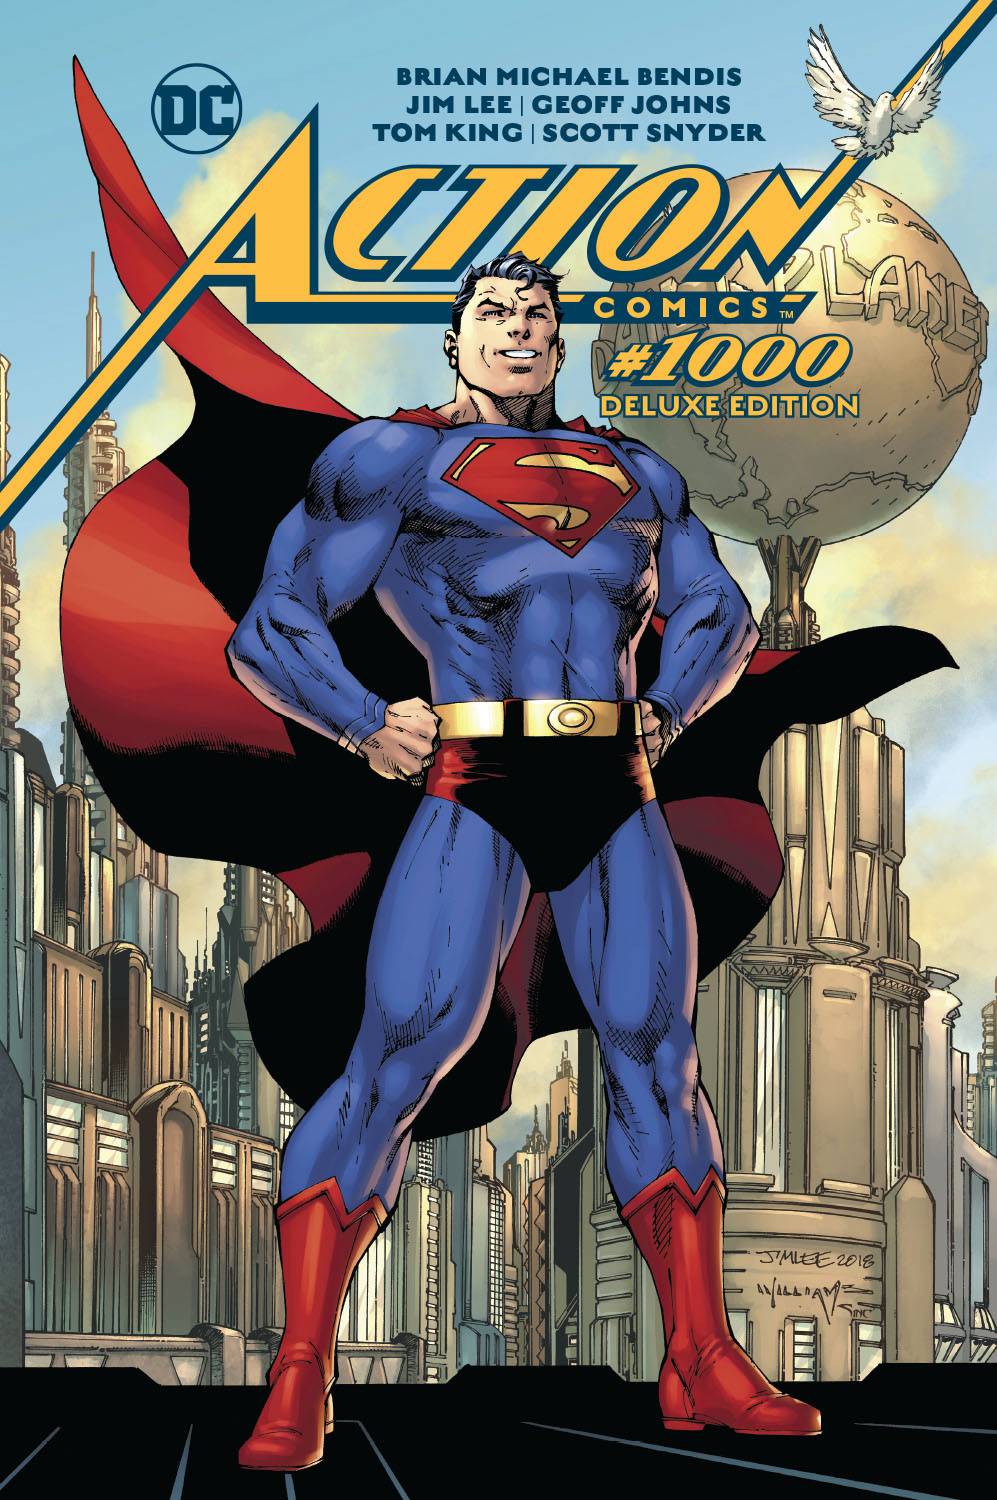 Action Comics #1000 the Deluxe Edition Hardcover